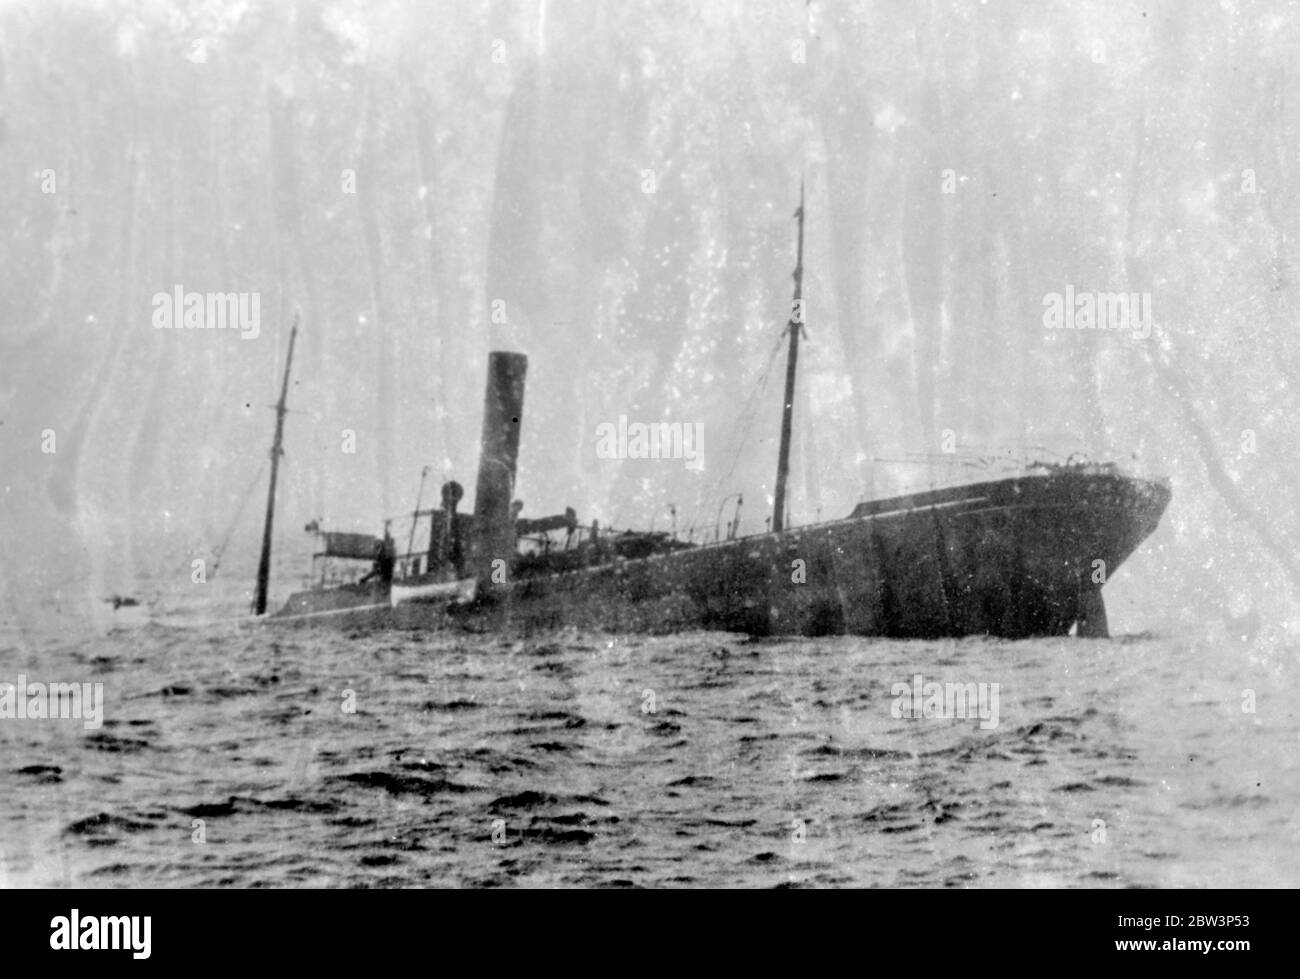 Steamer wrecked in collision , crew rescued . The Greek cargo ship Katingo was wrecked off the French coast near Brest after a collision with the Italian ship Assunzione . The crew of the Katingo were rescued . Photo shows , the sinking Katingo after the collision . 8 May 1936 Stock Photo